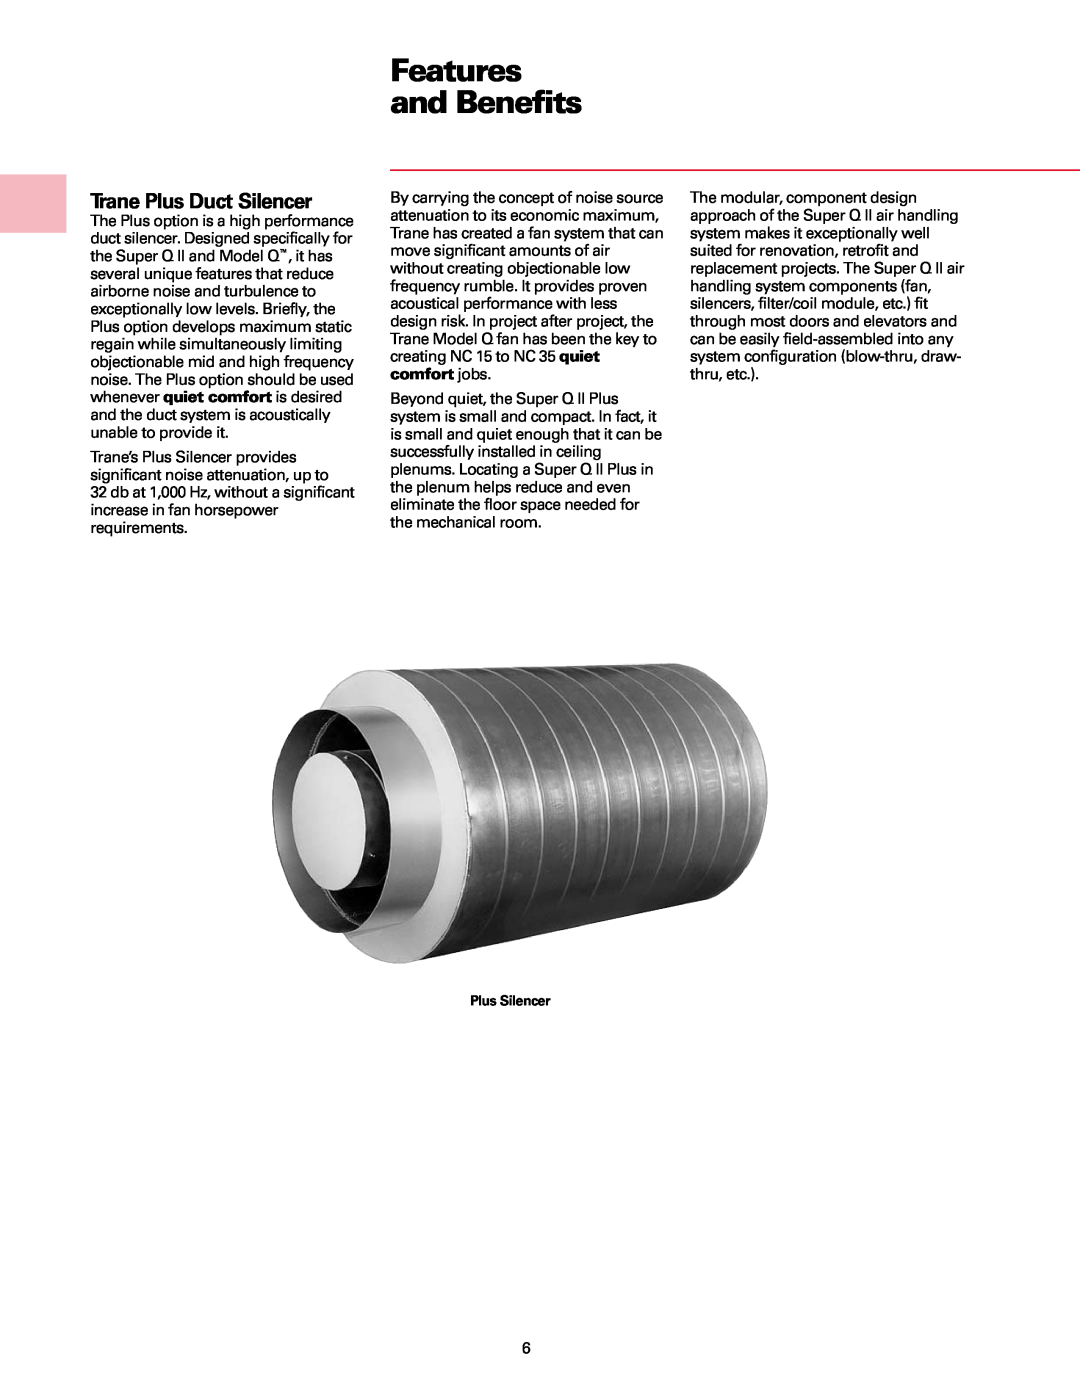 Trane Fan manual Trane Plus Duct Silencer, Features and Benefits 